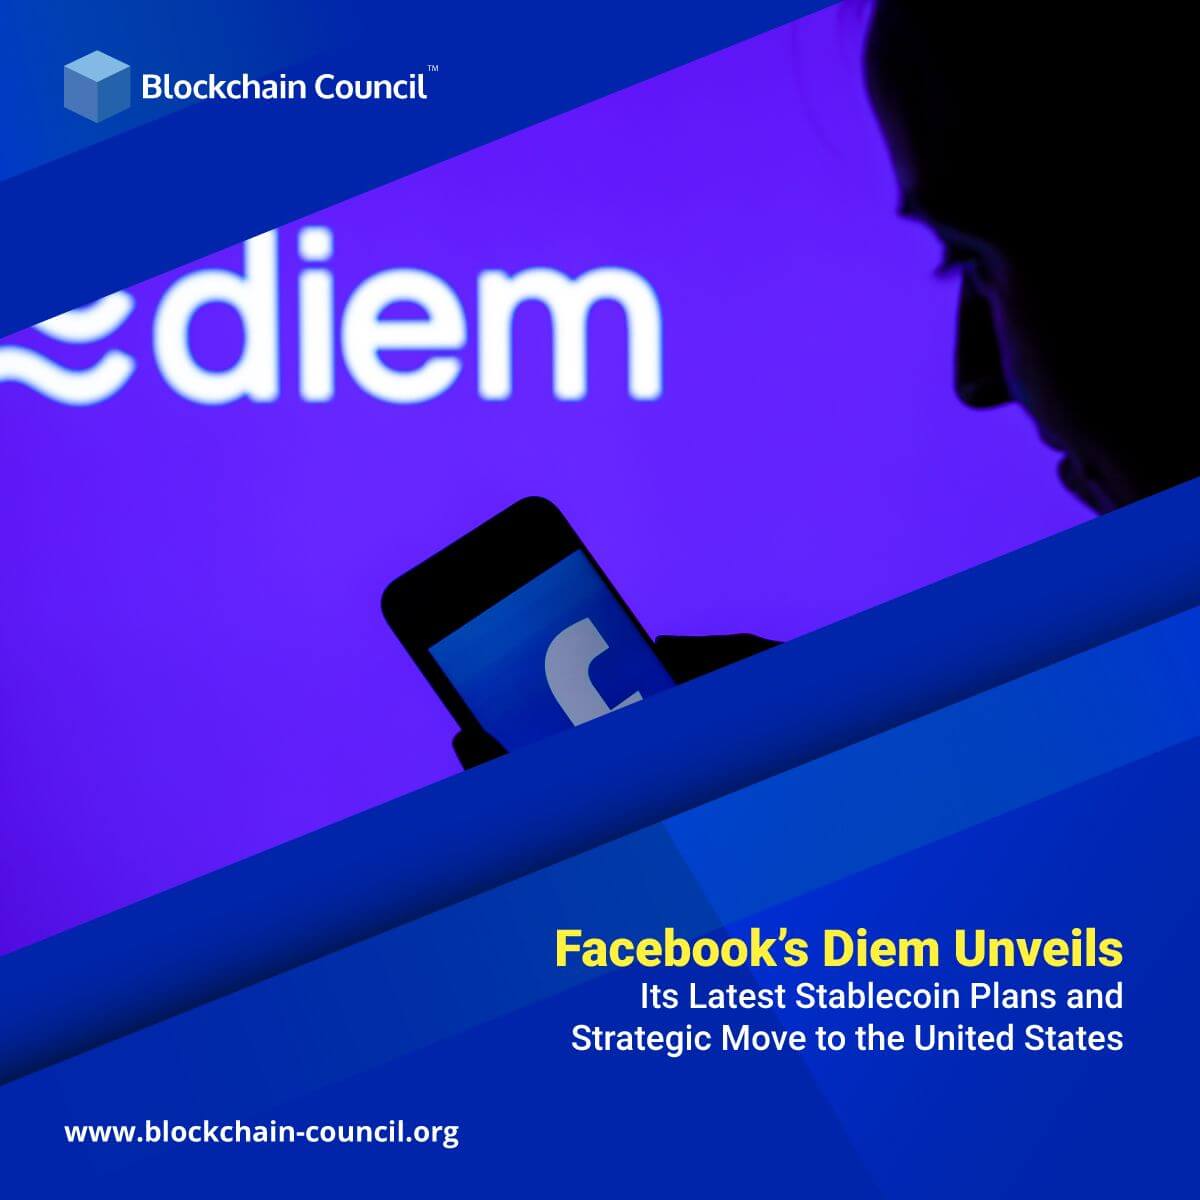 Facebook’s Diem Unveils Its Latest Stablecoin Plans and Strategic Move to the United States